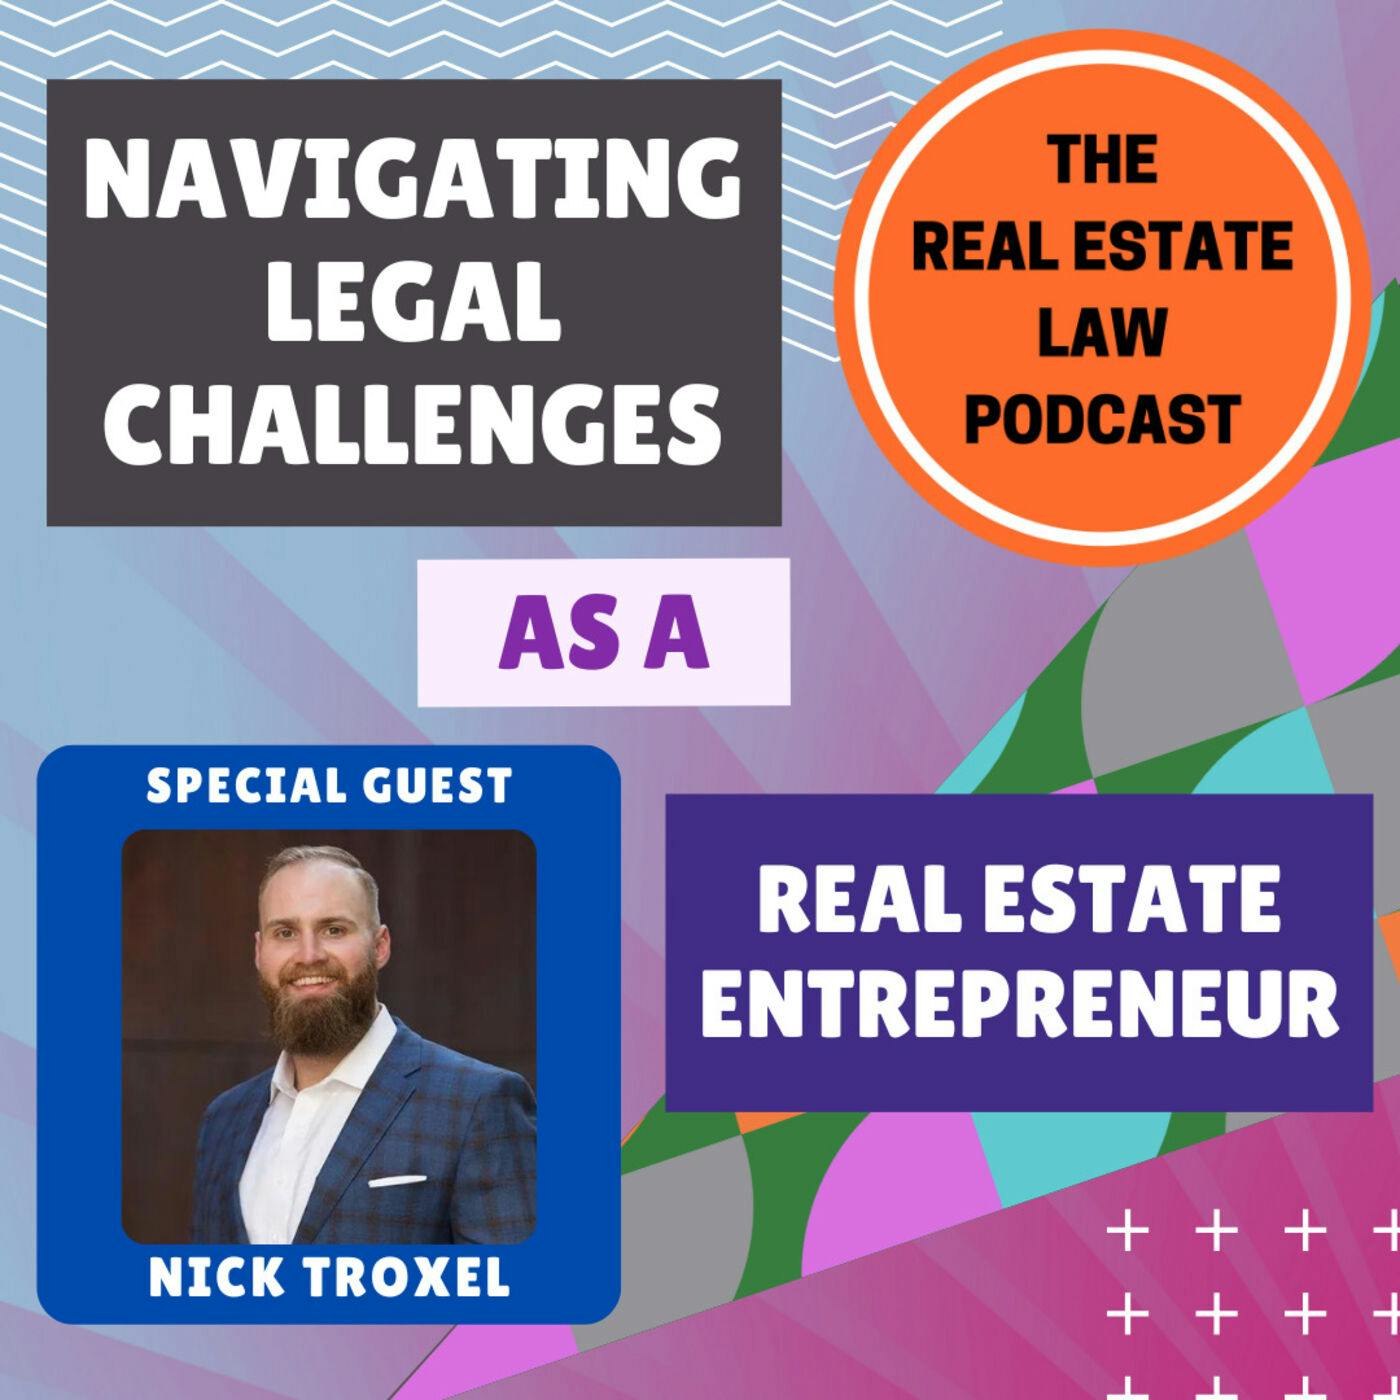 Navigating Legal Challenges as a Real Estate Entrepreneur with Business Attorney Nick Troxel